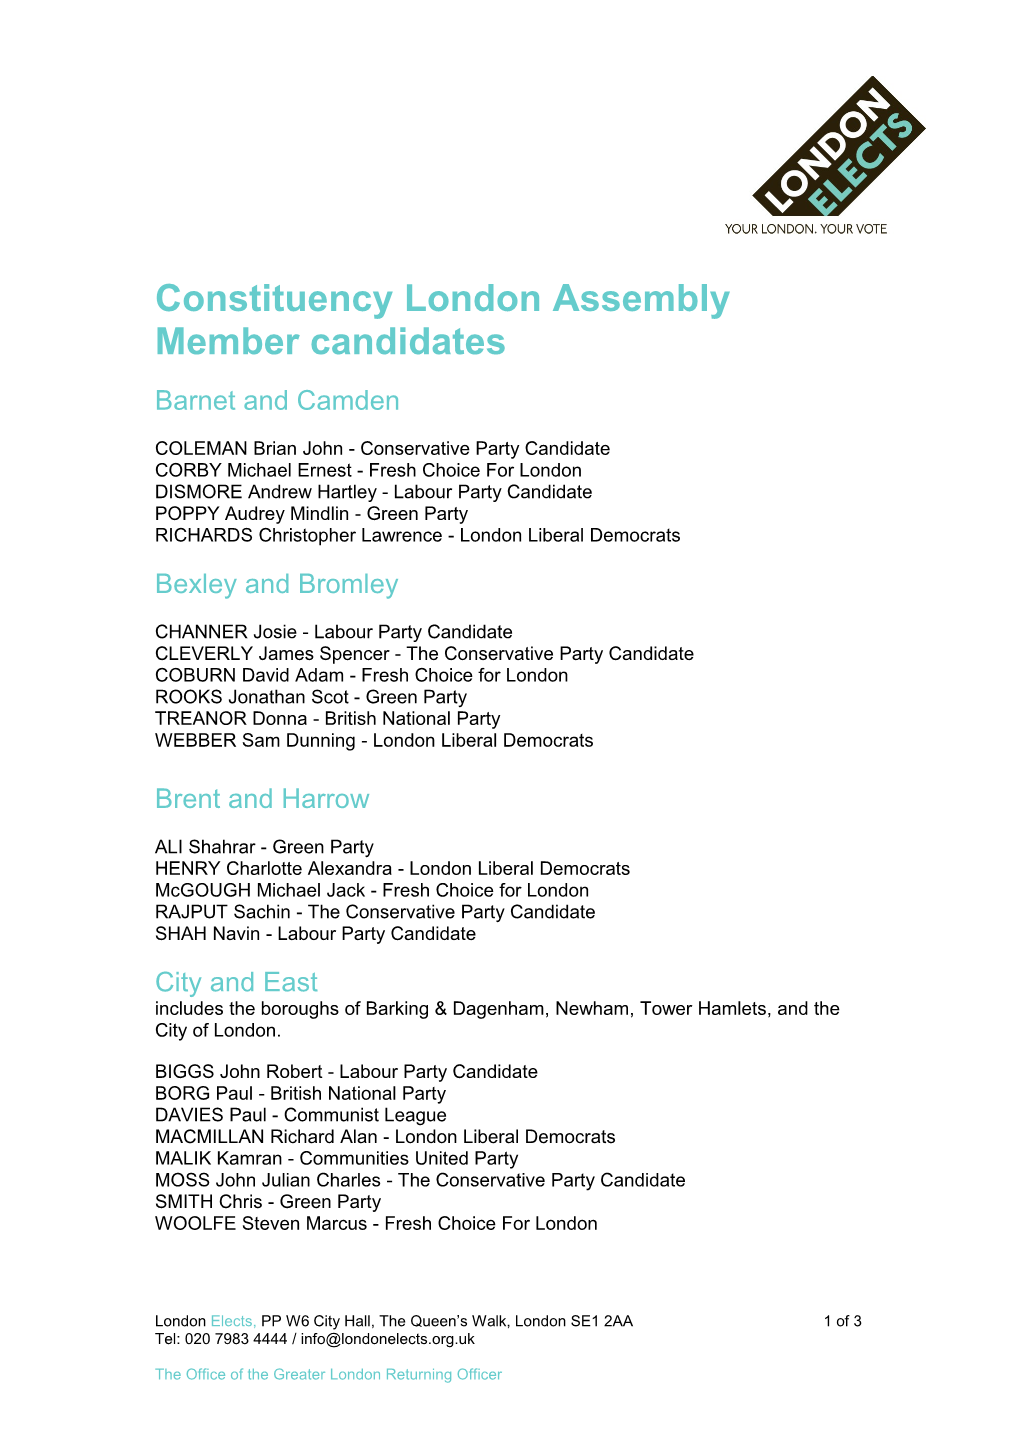 Constituency London Assembly Member Candidates